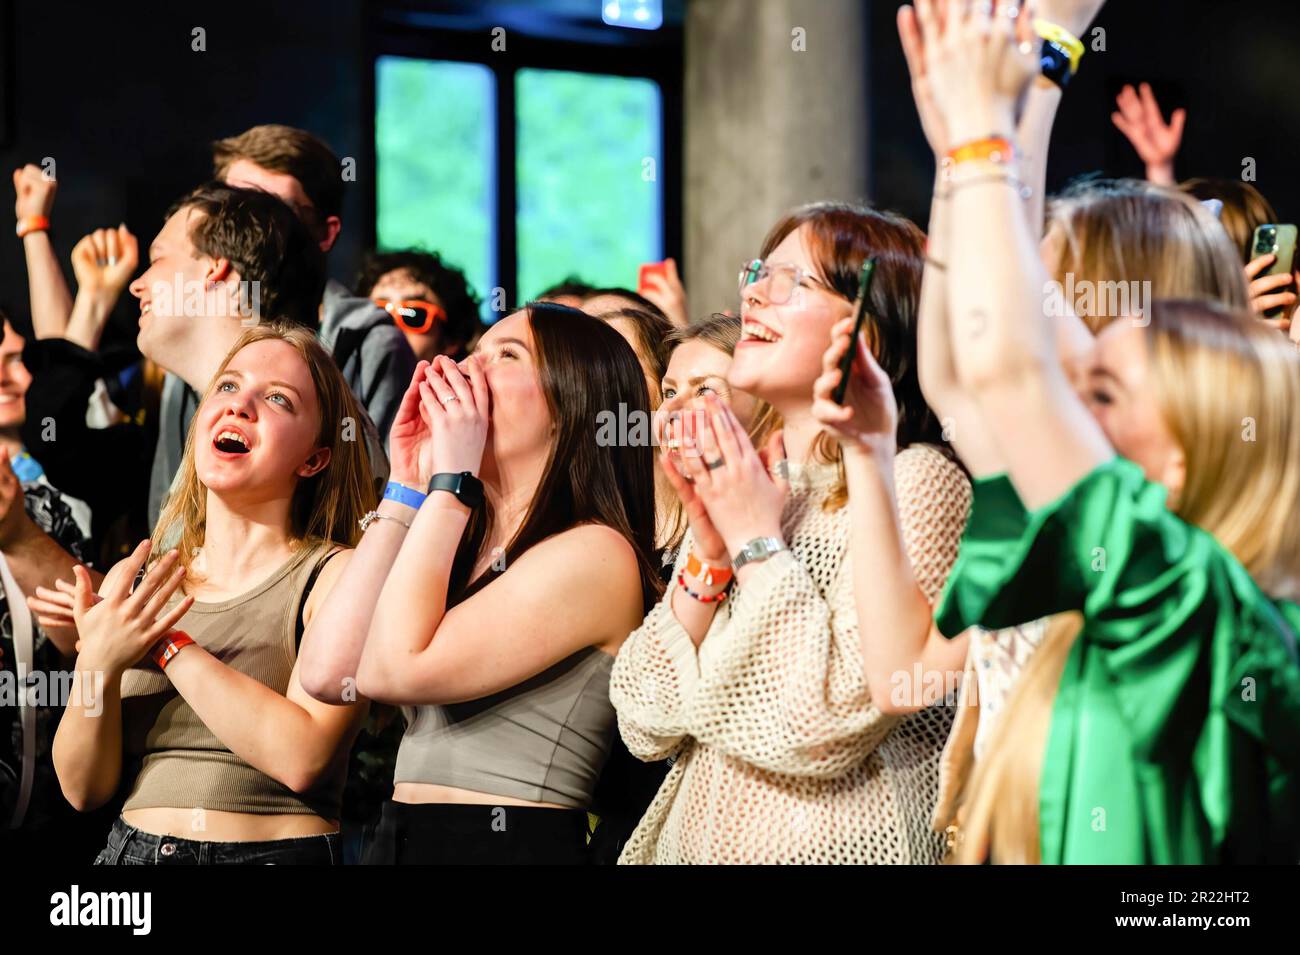 Breda, Netherlands, 15/05/2023, Fans cheer as the Ukrainian band GO A performs during the night termed 'support each other'. The Ukrainian band GO A, played exclusively for Ukrainian students at Breda University of Applied Sciences. The band wanted to bring the Ukrainian students together during the night to support each other. During the event, there was a voluntary collection of funds for the support of Ukraine, all donated to the 'Sails of Freedom' Foundation in the Netherlands. The charity performance was possible with the support of the rector of Breda University of Applied Sciences and t Stock Photo